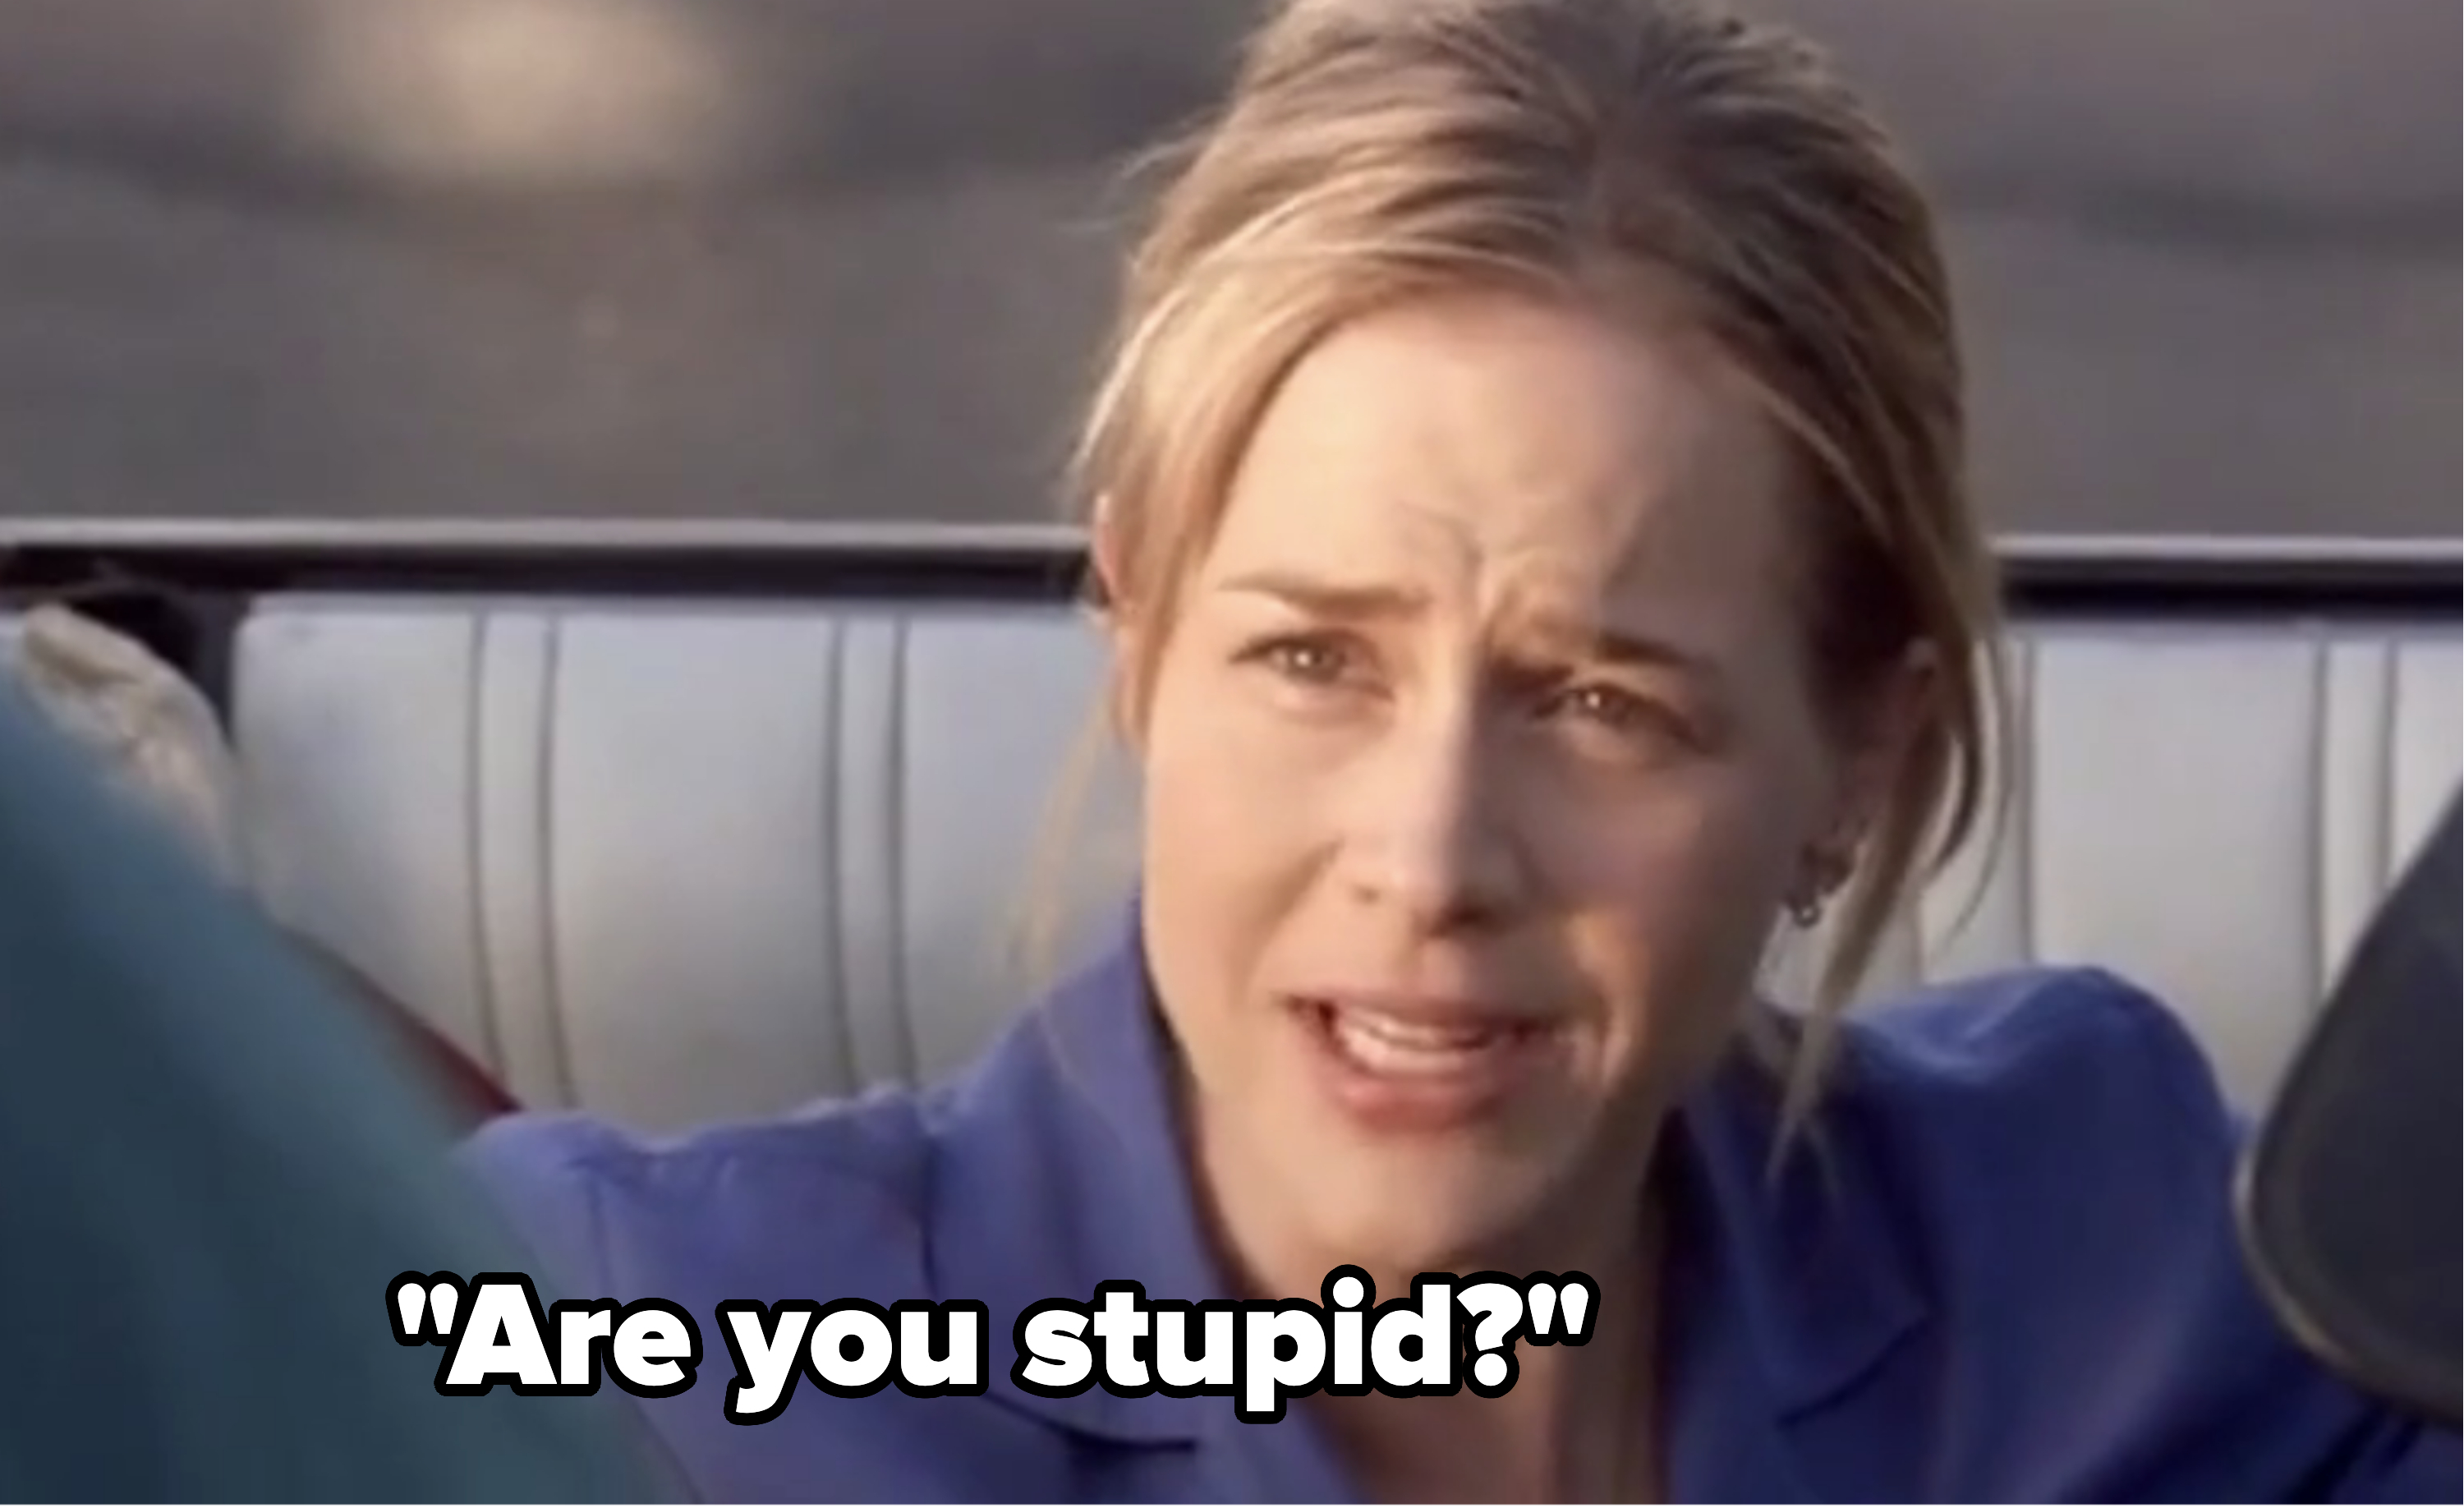 Woman with blonde hair wearing a blue shirt, looks concerned, in a car scene